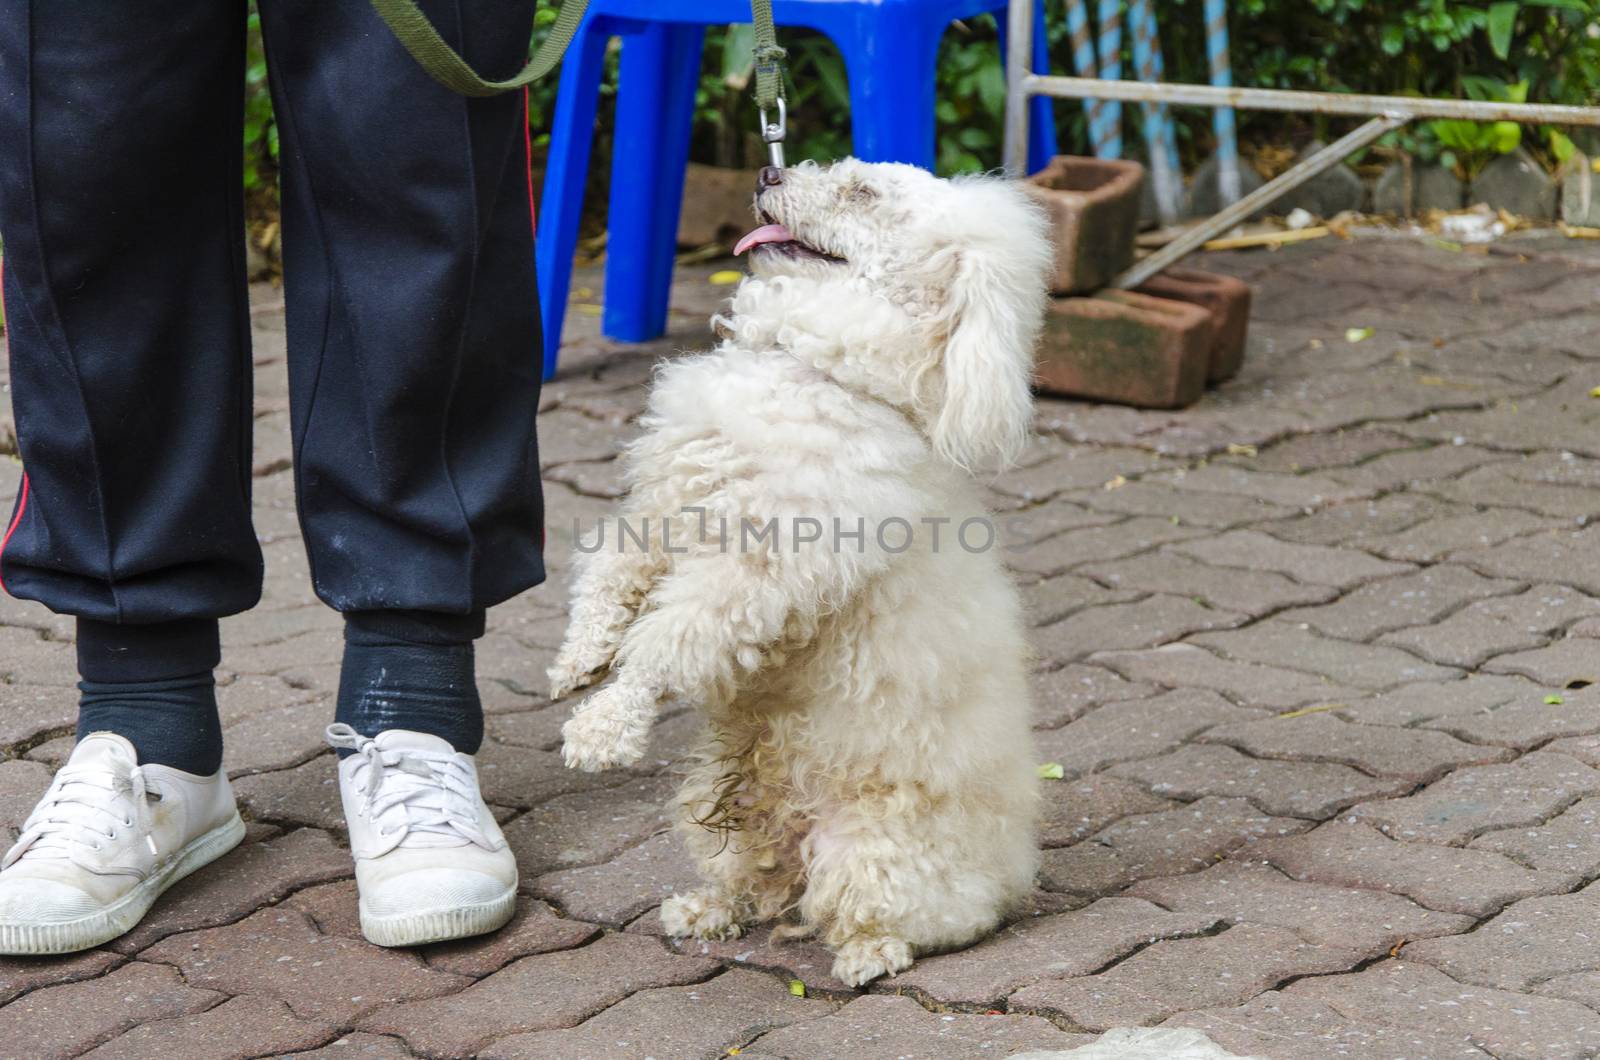 BANGKOK - AUGUST 2 2014, Dusit Sound Dog Show in Dusit Zoo or Ka by siiixth